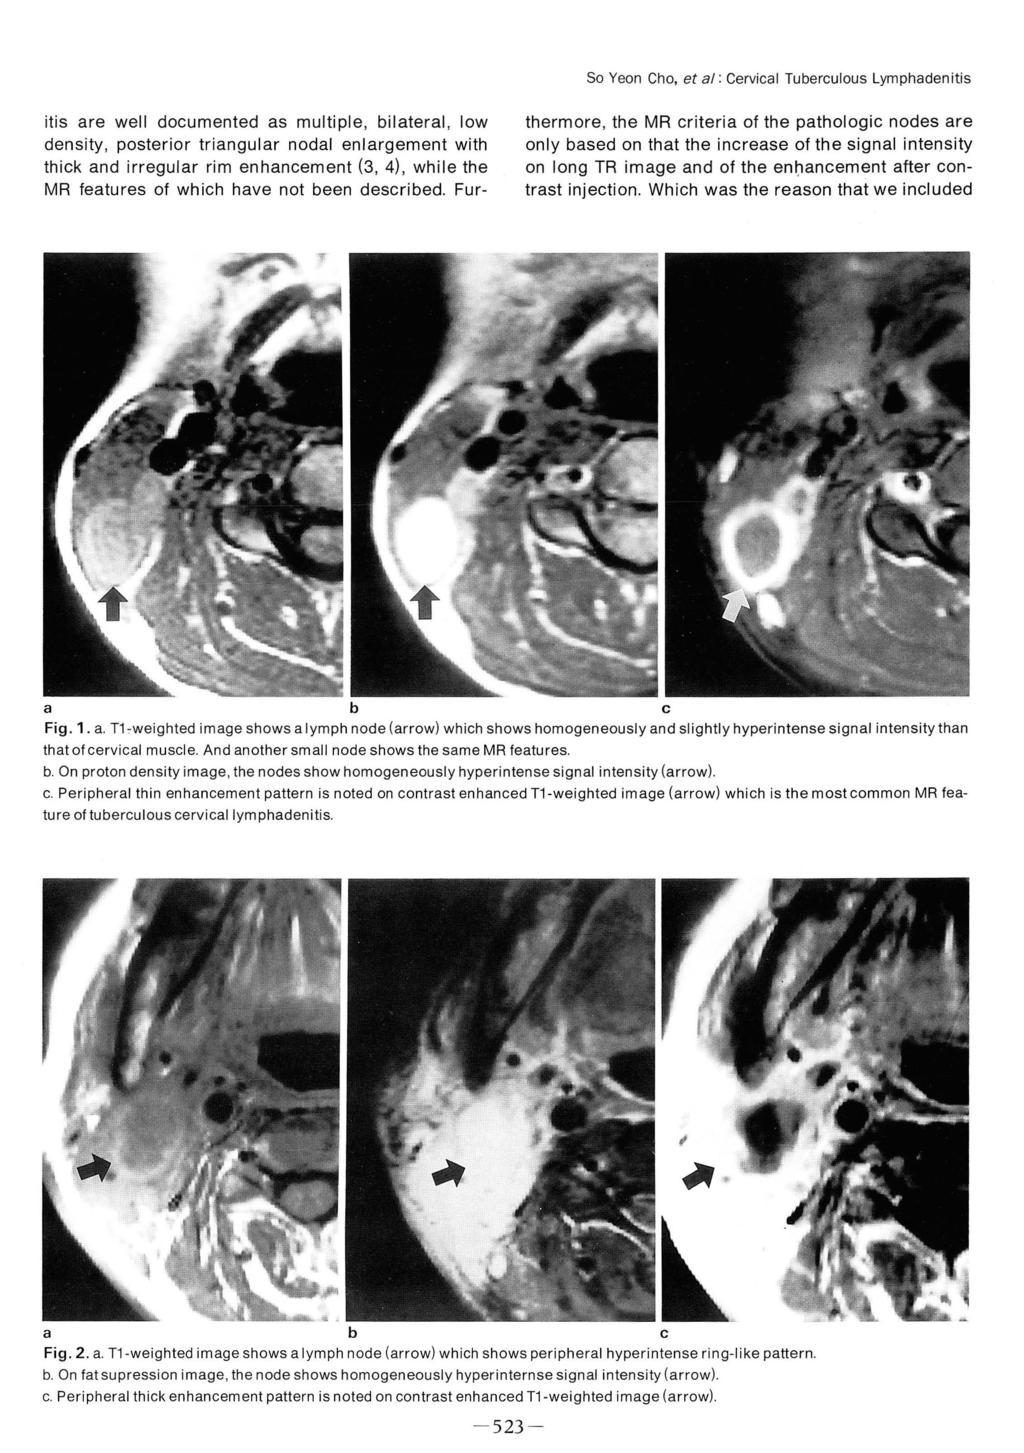 So Yeon Cho, et al: Cervical Tuberculous Lymphadenitis itis are well documented as multiple, bilateral, low density, posterior triangular nodal enlargement with thick and irregular rim enhancement